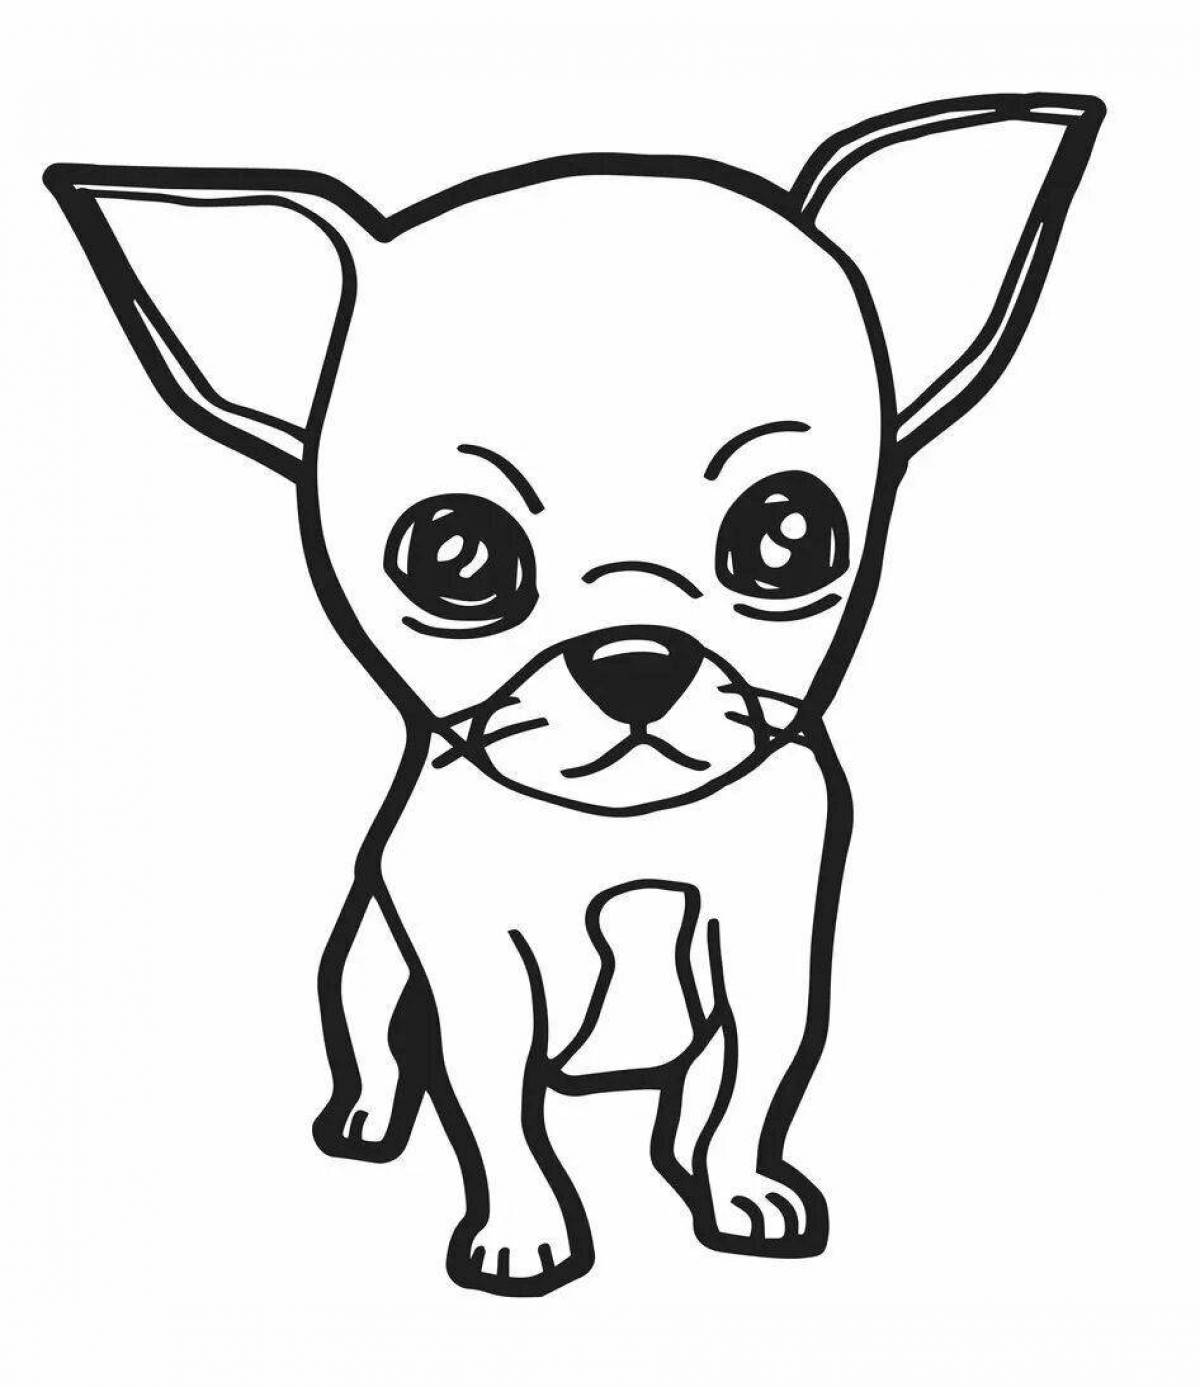 Exciting chihuahua coloring book for kids